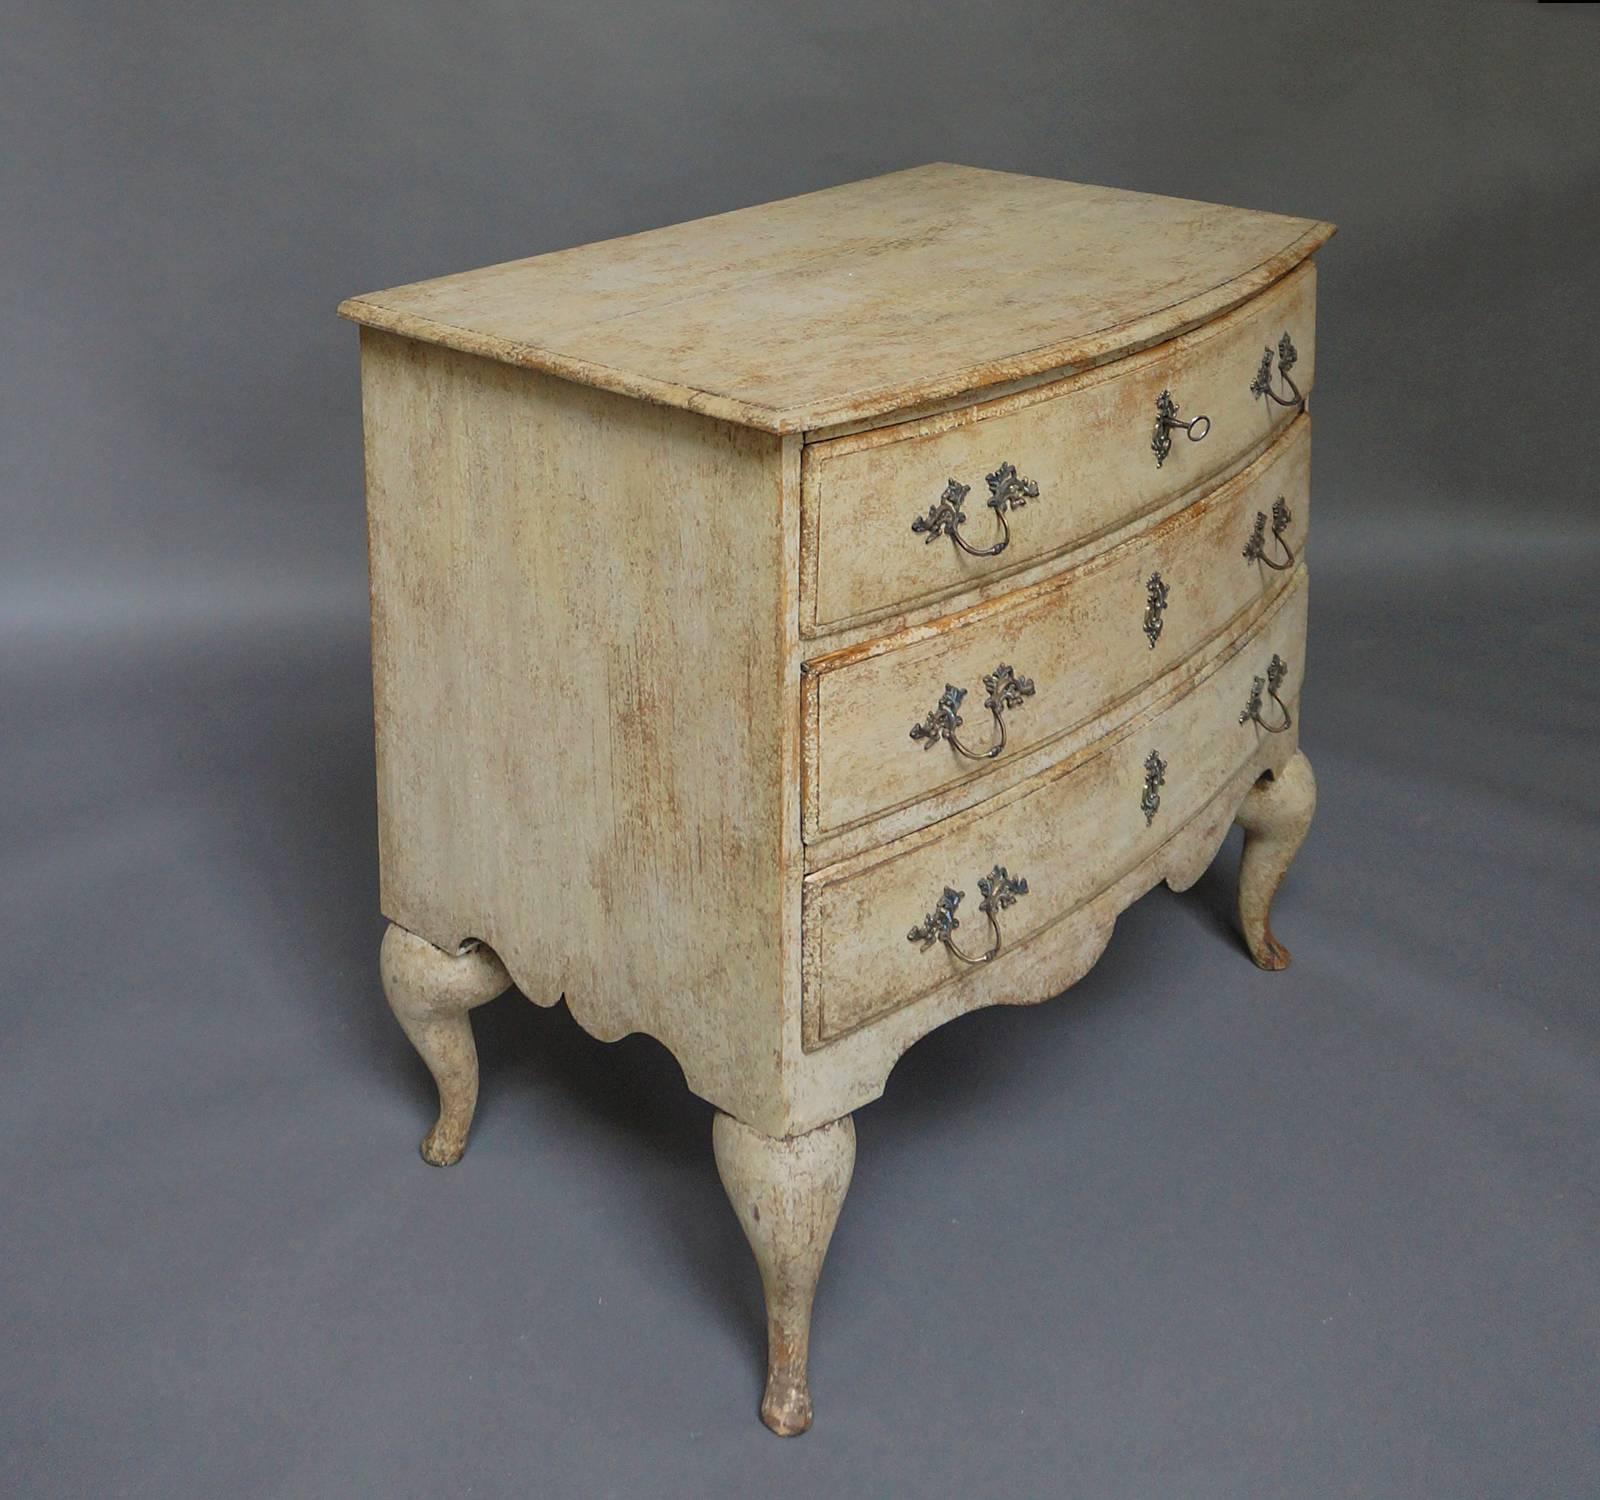 Early Rococo chest of drawers, Sweden, circa 1760. Original hardware and old painted surface with wonderful patina.